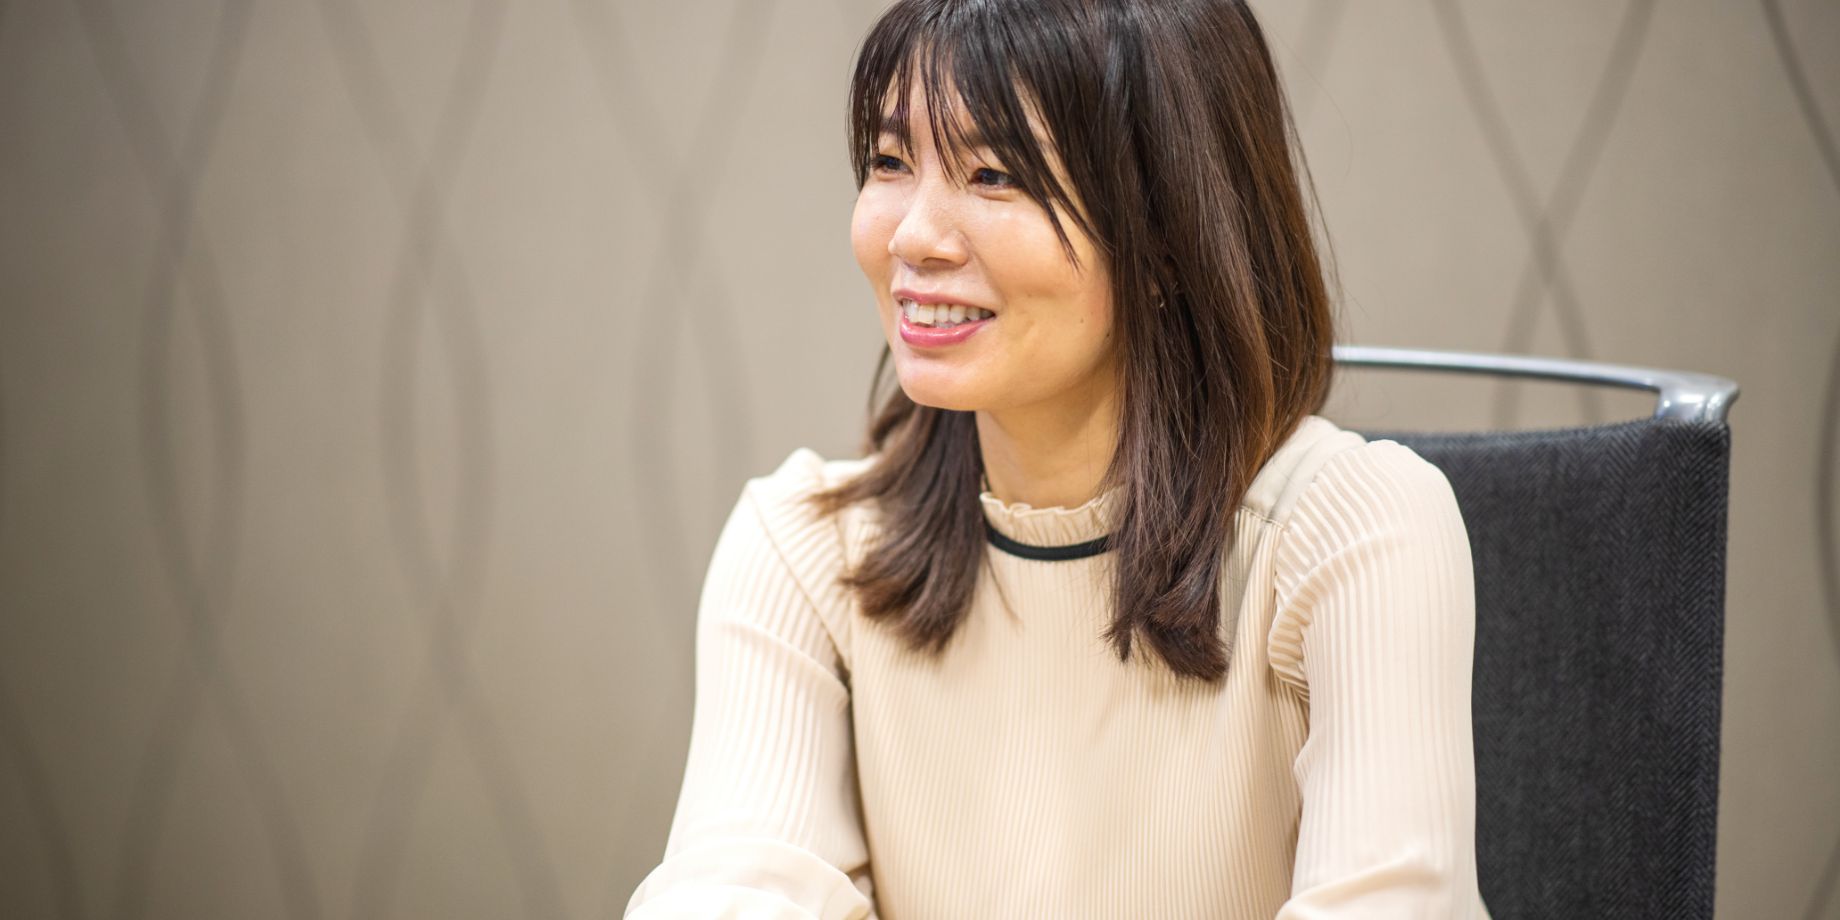 Tamaki: “I’m the youngest in the Risk Management Division. I think it’s a very comfortable place to work, even for people like me who are raising children or balancing work with nursing care.”